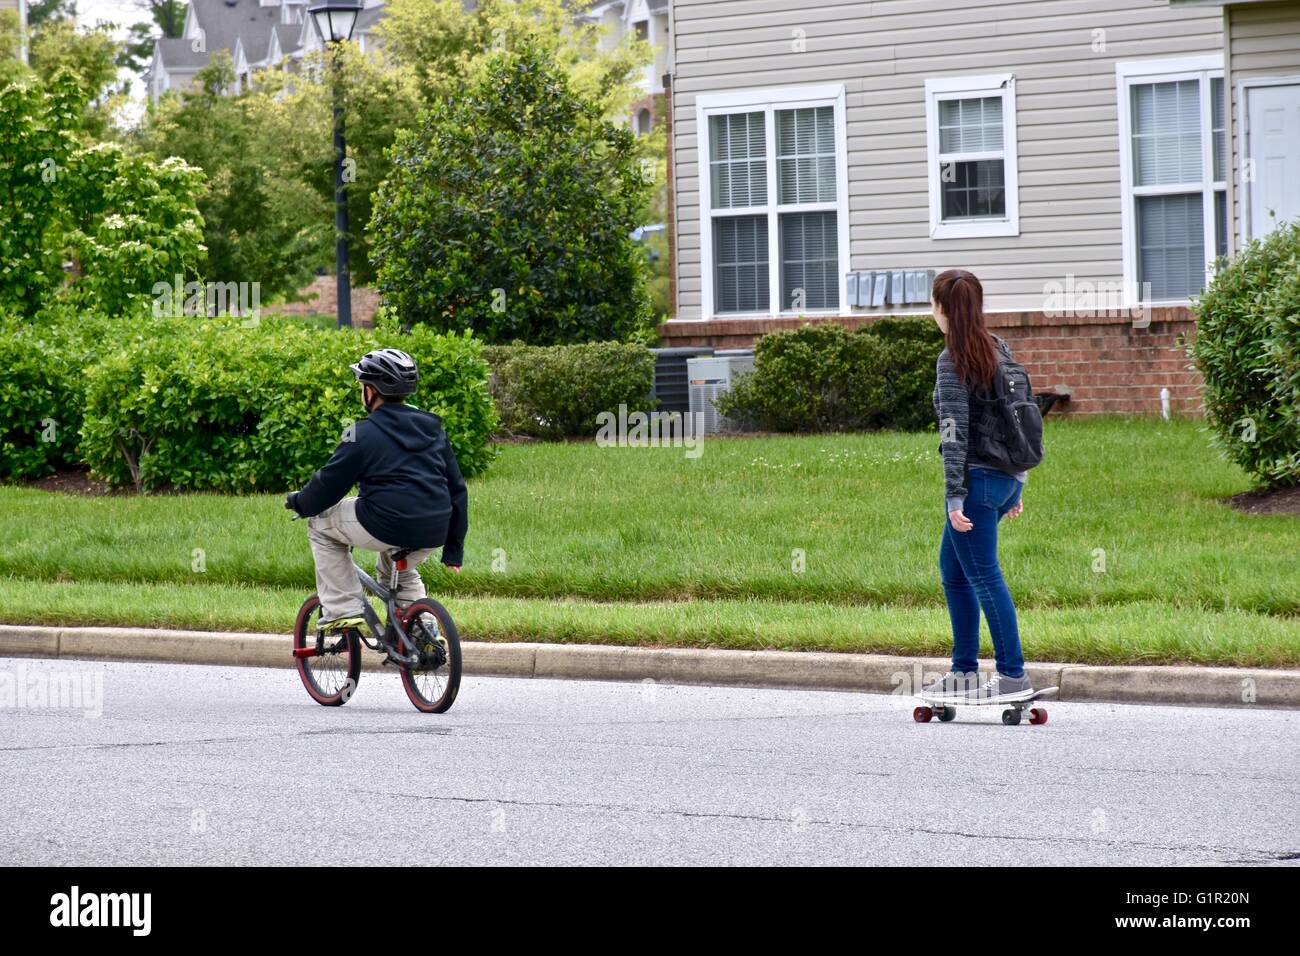 Two teens riding a bike and skateboard down a residential street Stock Photo